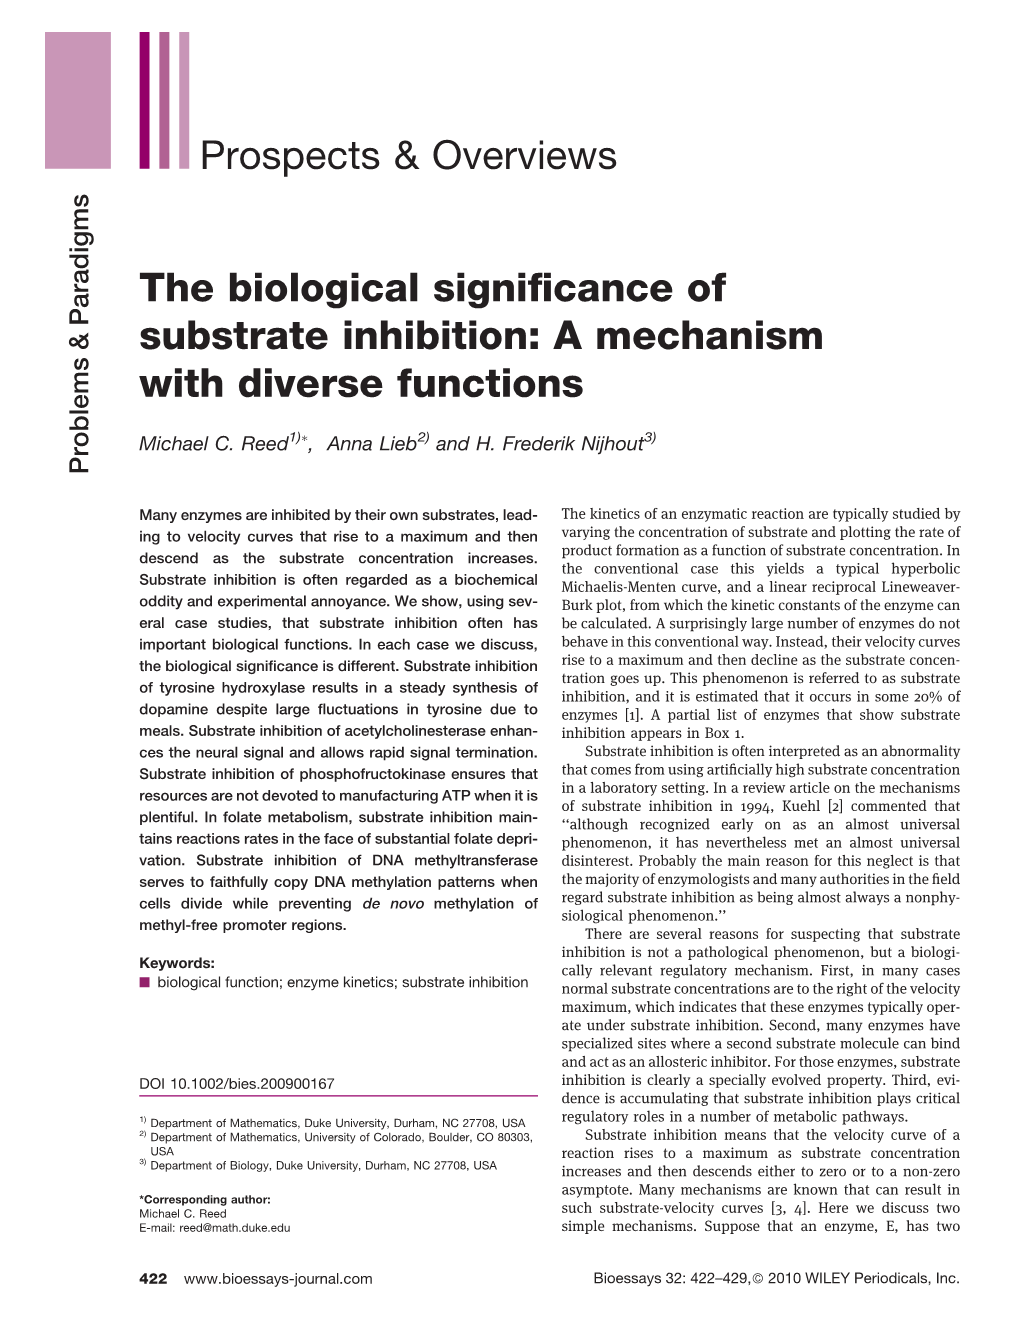 The Biological Significance of Substrate Inhibition